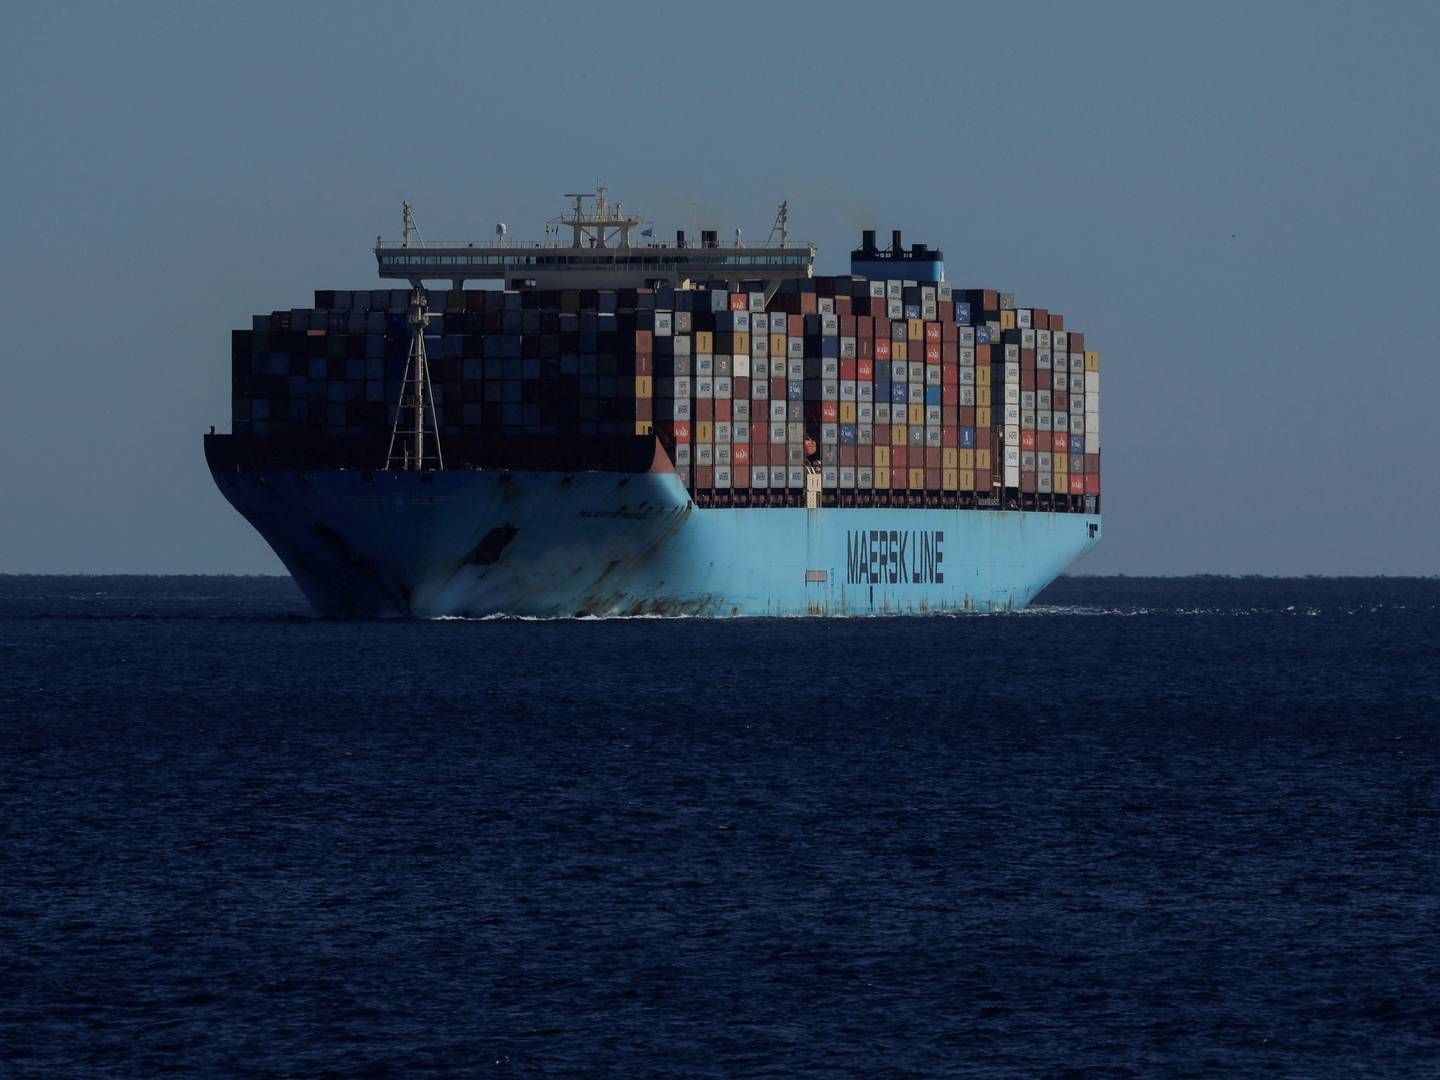 Last week a Maersk vessel was attacked. | Photo: The Maersk vessel Marsk Gibraltar was attacked on Thursday.